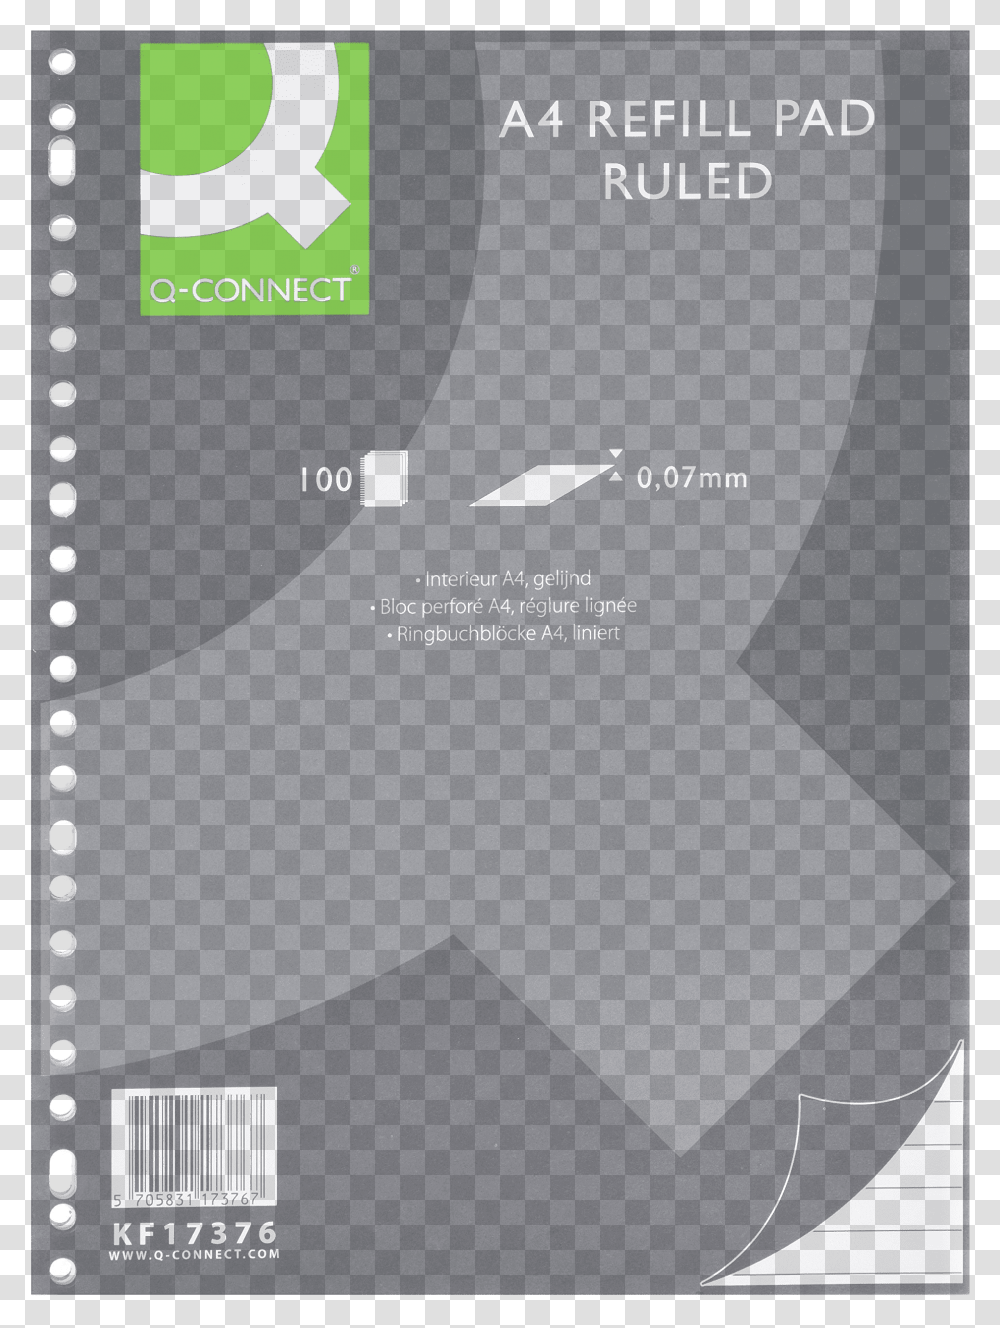 Value A4 Refill Pad Ruled 70gsm 100 Sheets Pk10 Sketch Pad, Electronics, Computer, Poster Transparent Png